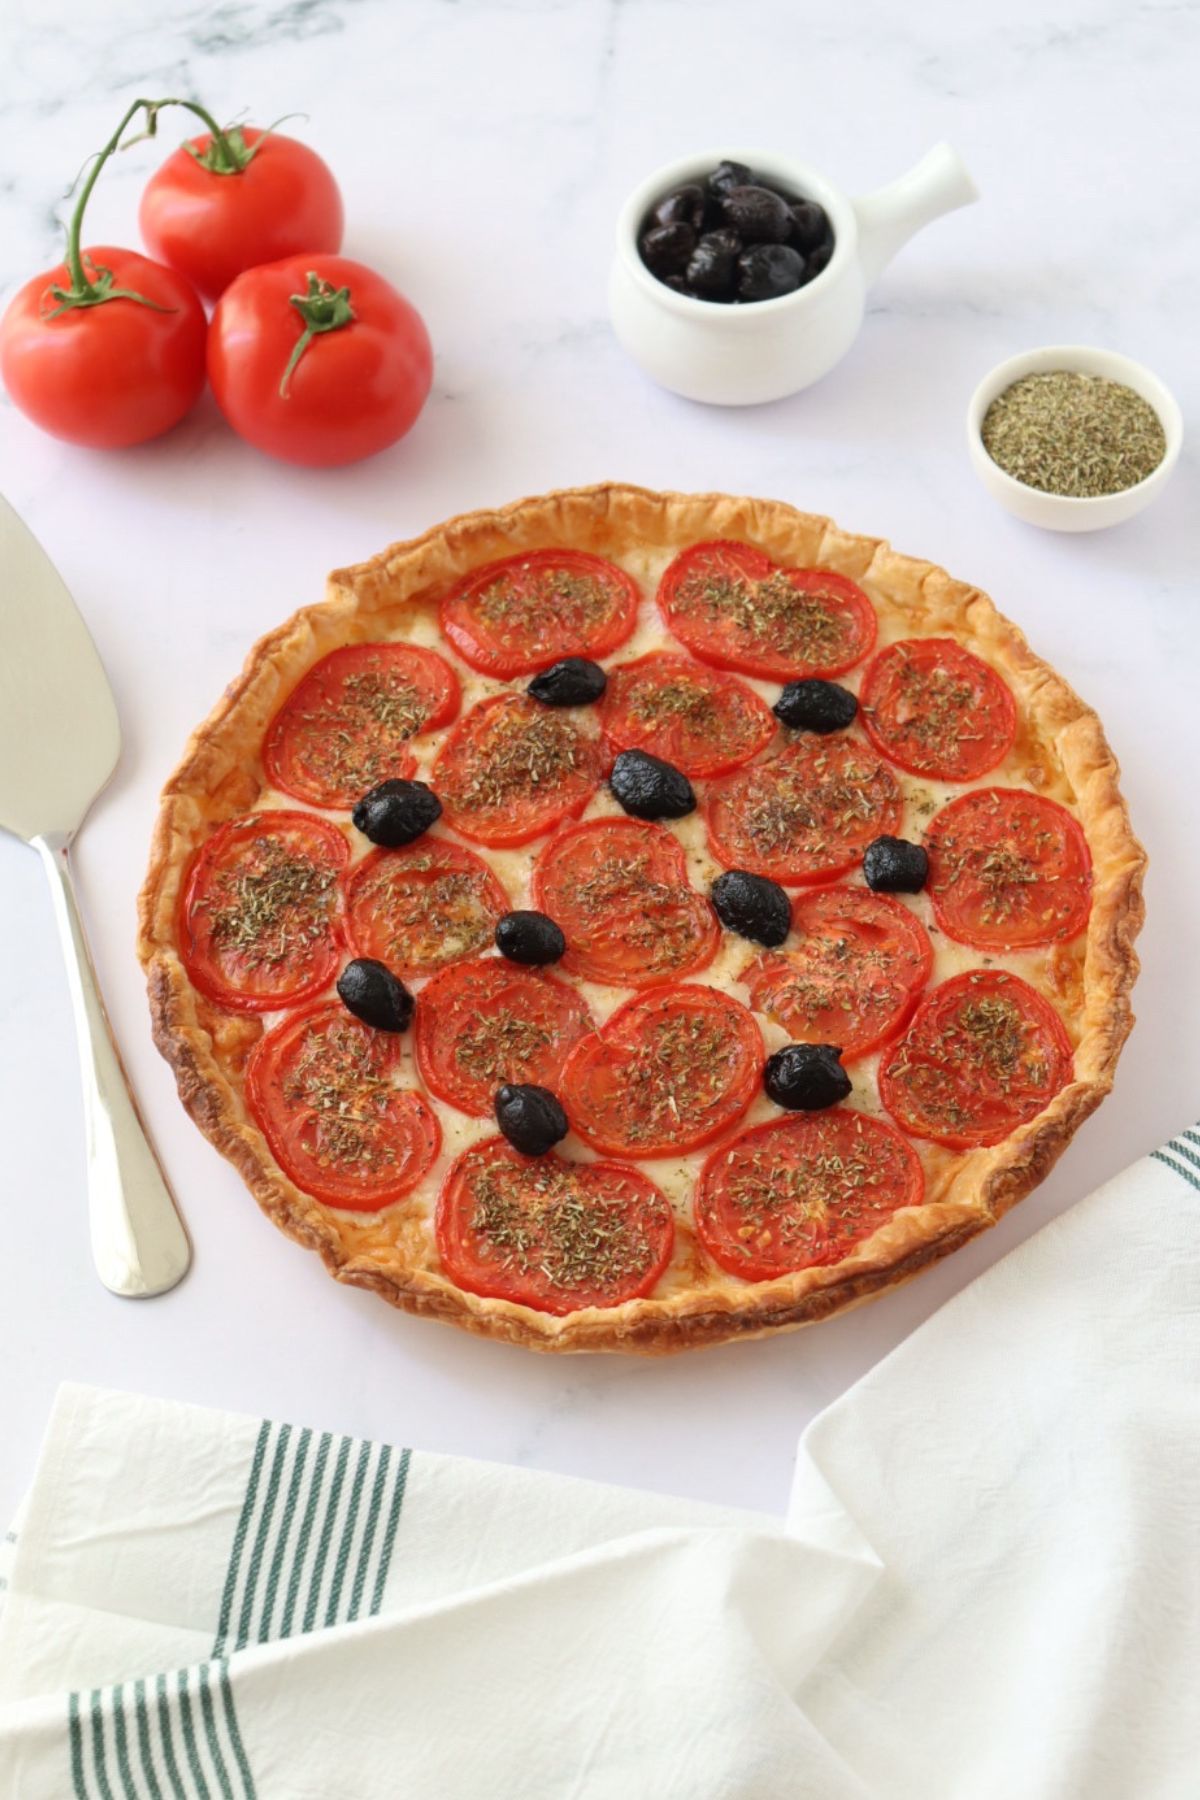 A tomato tart surrounded with 3 tomatoes, a small pot of herbs de Provence, a pot of black olives, a pie server and a kitchen cloth.